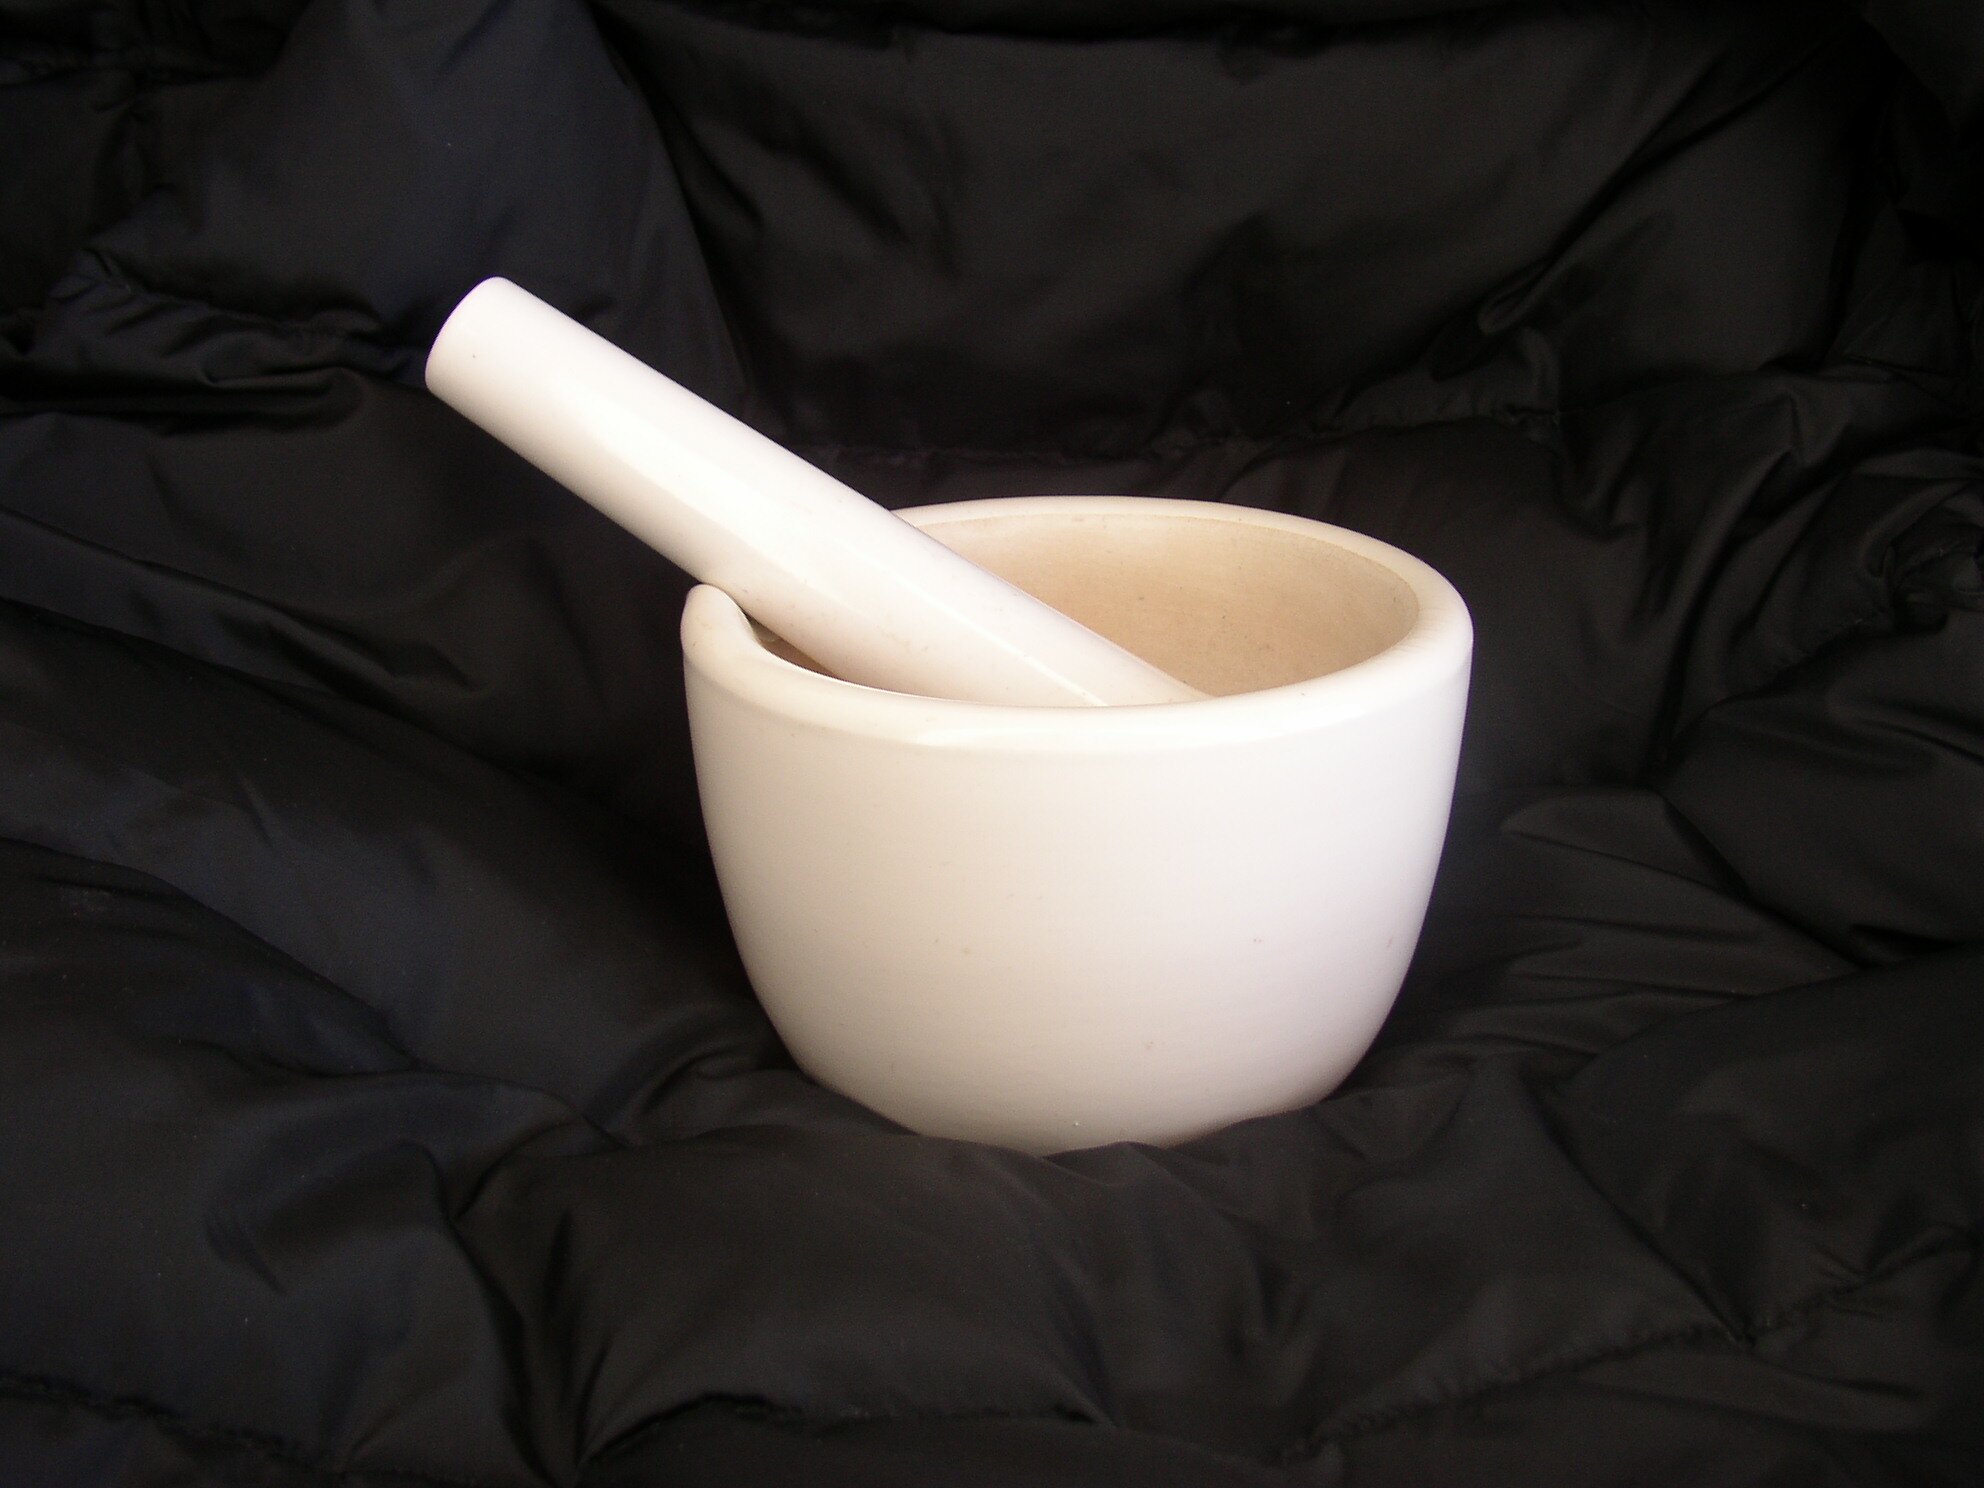 The mortar and pestle are as old a herbal medicine itself. Traditionally made of clay, but also of iron, granite, and other materials, they serve for crushing, blending, etc. of items placed in them. Some are round and others are oval. Size ranges from tiny to very large.